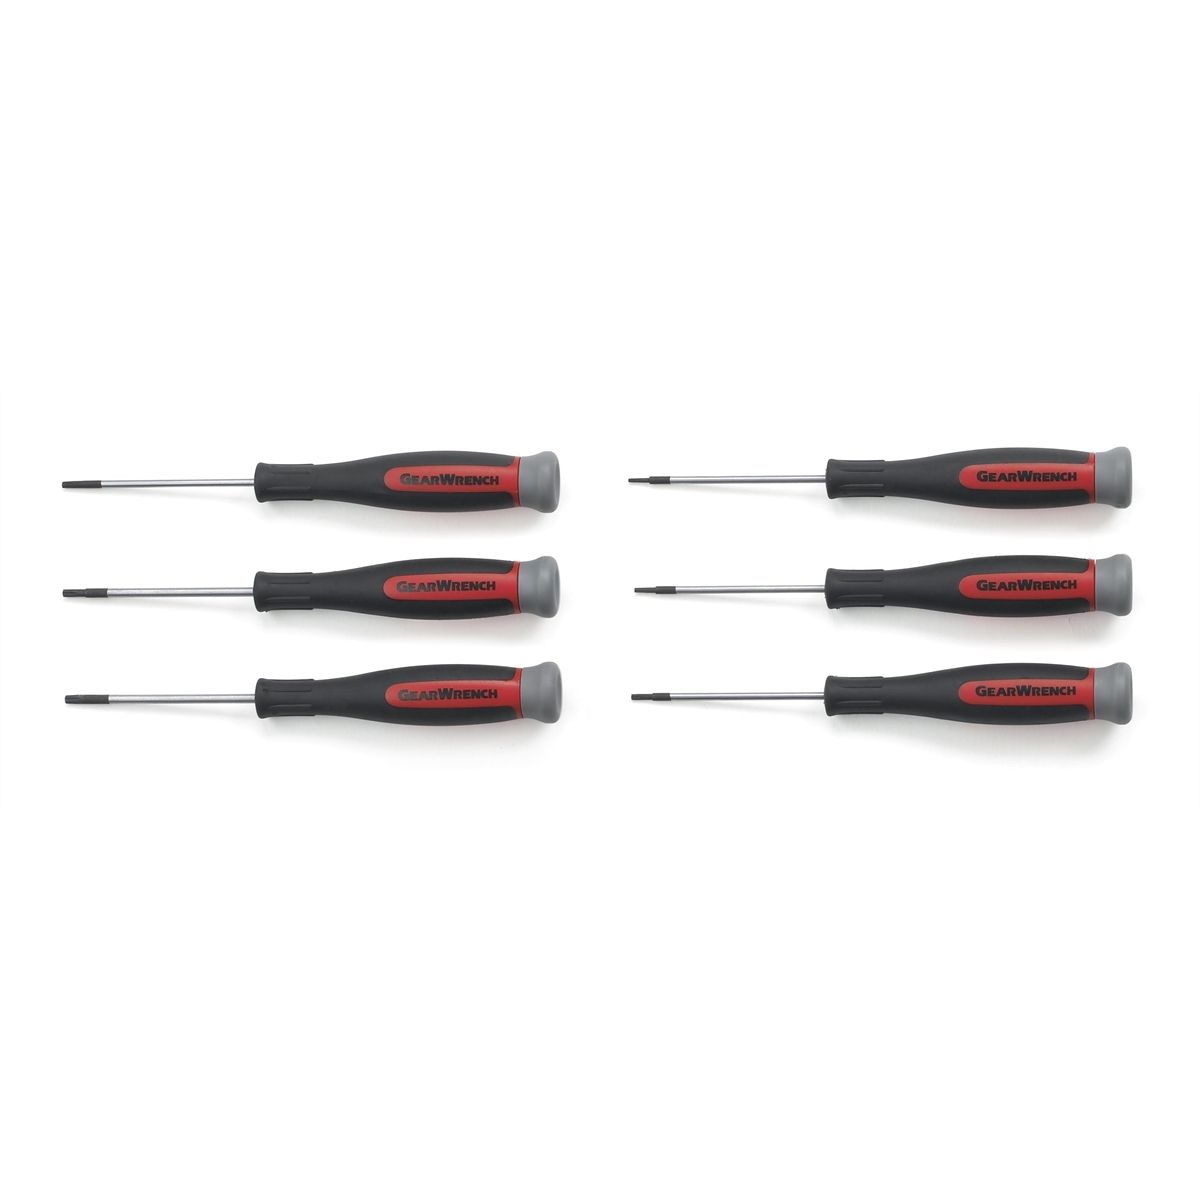 6 x Phillips 12pc Engineers Screwdriver Set 6 x Slotted Steel Blades